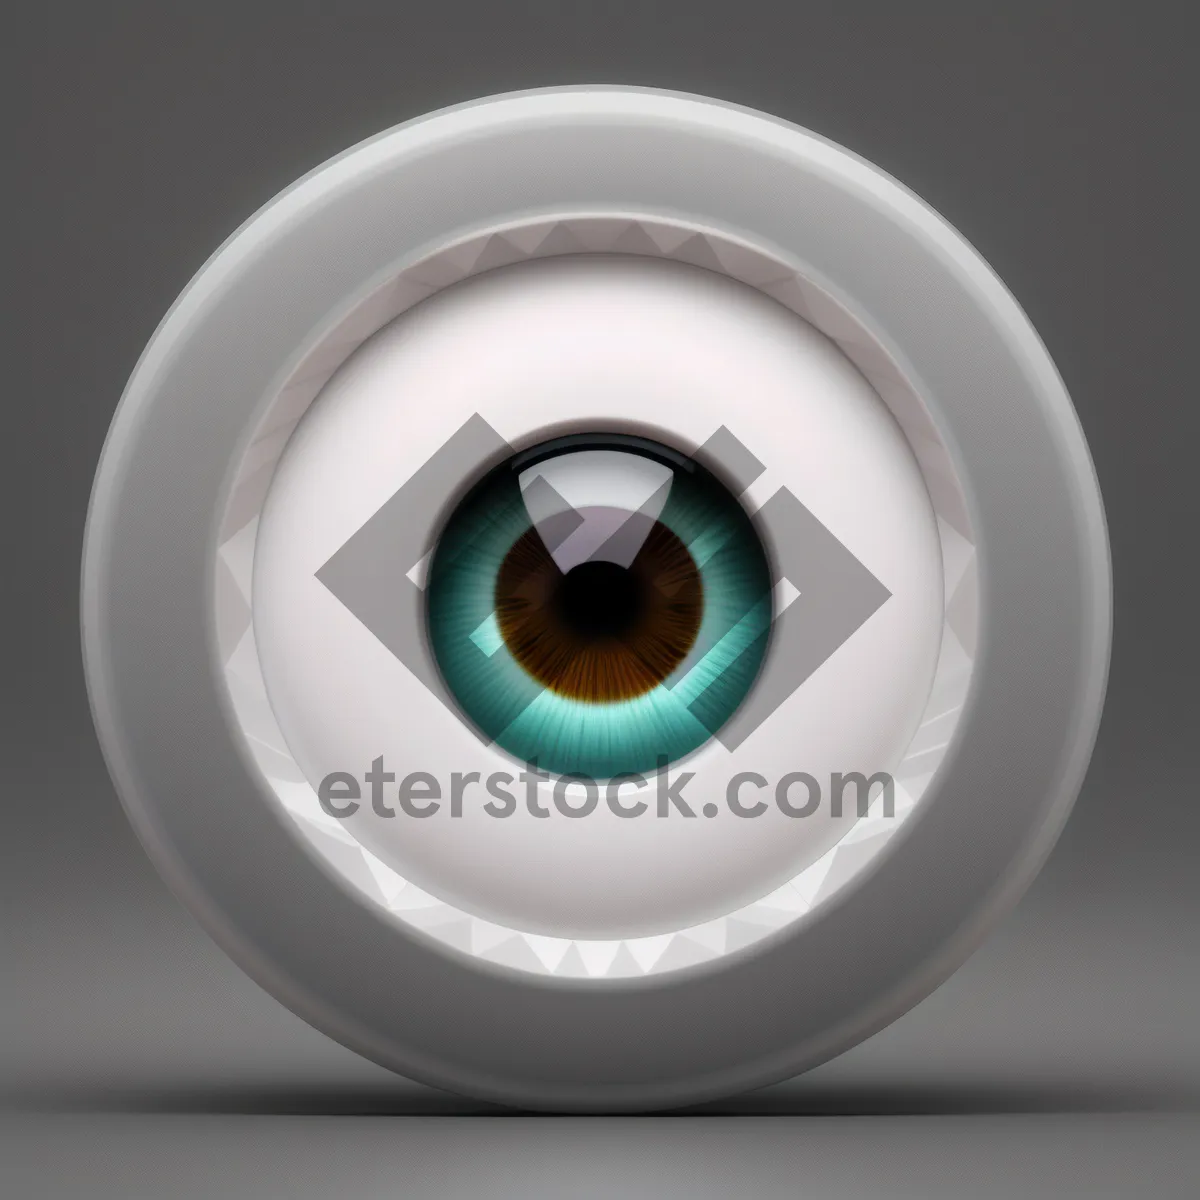 Picture of Modern 3D Web Button with Shiny Push Icon